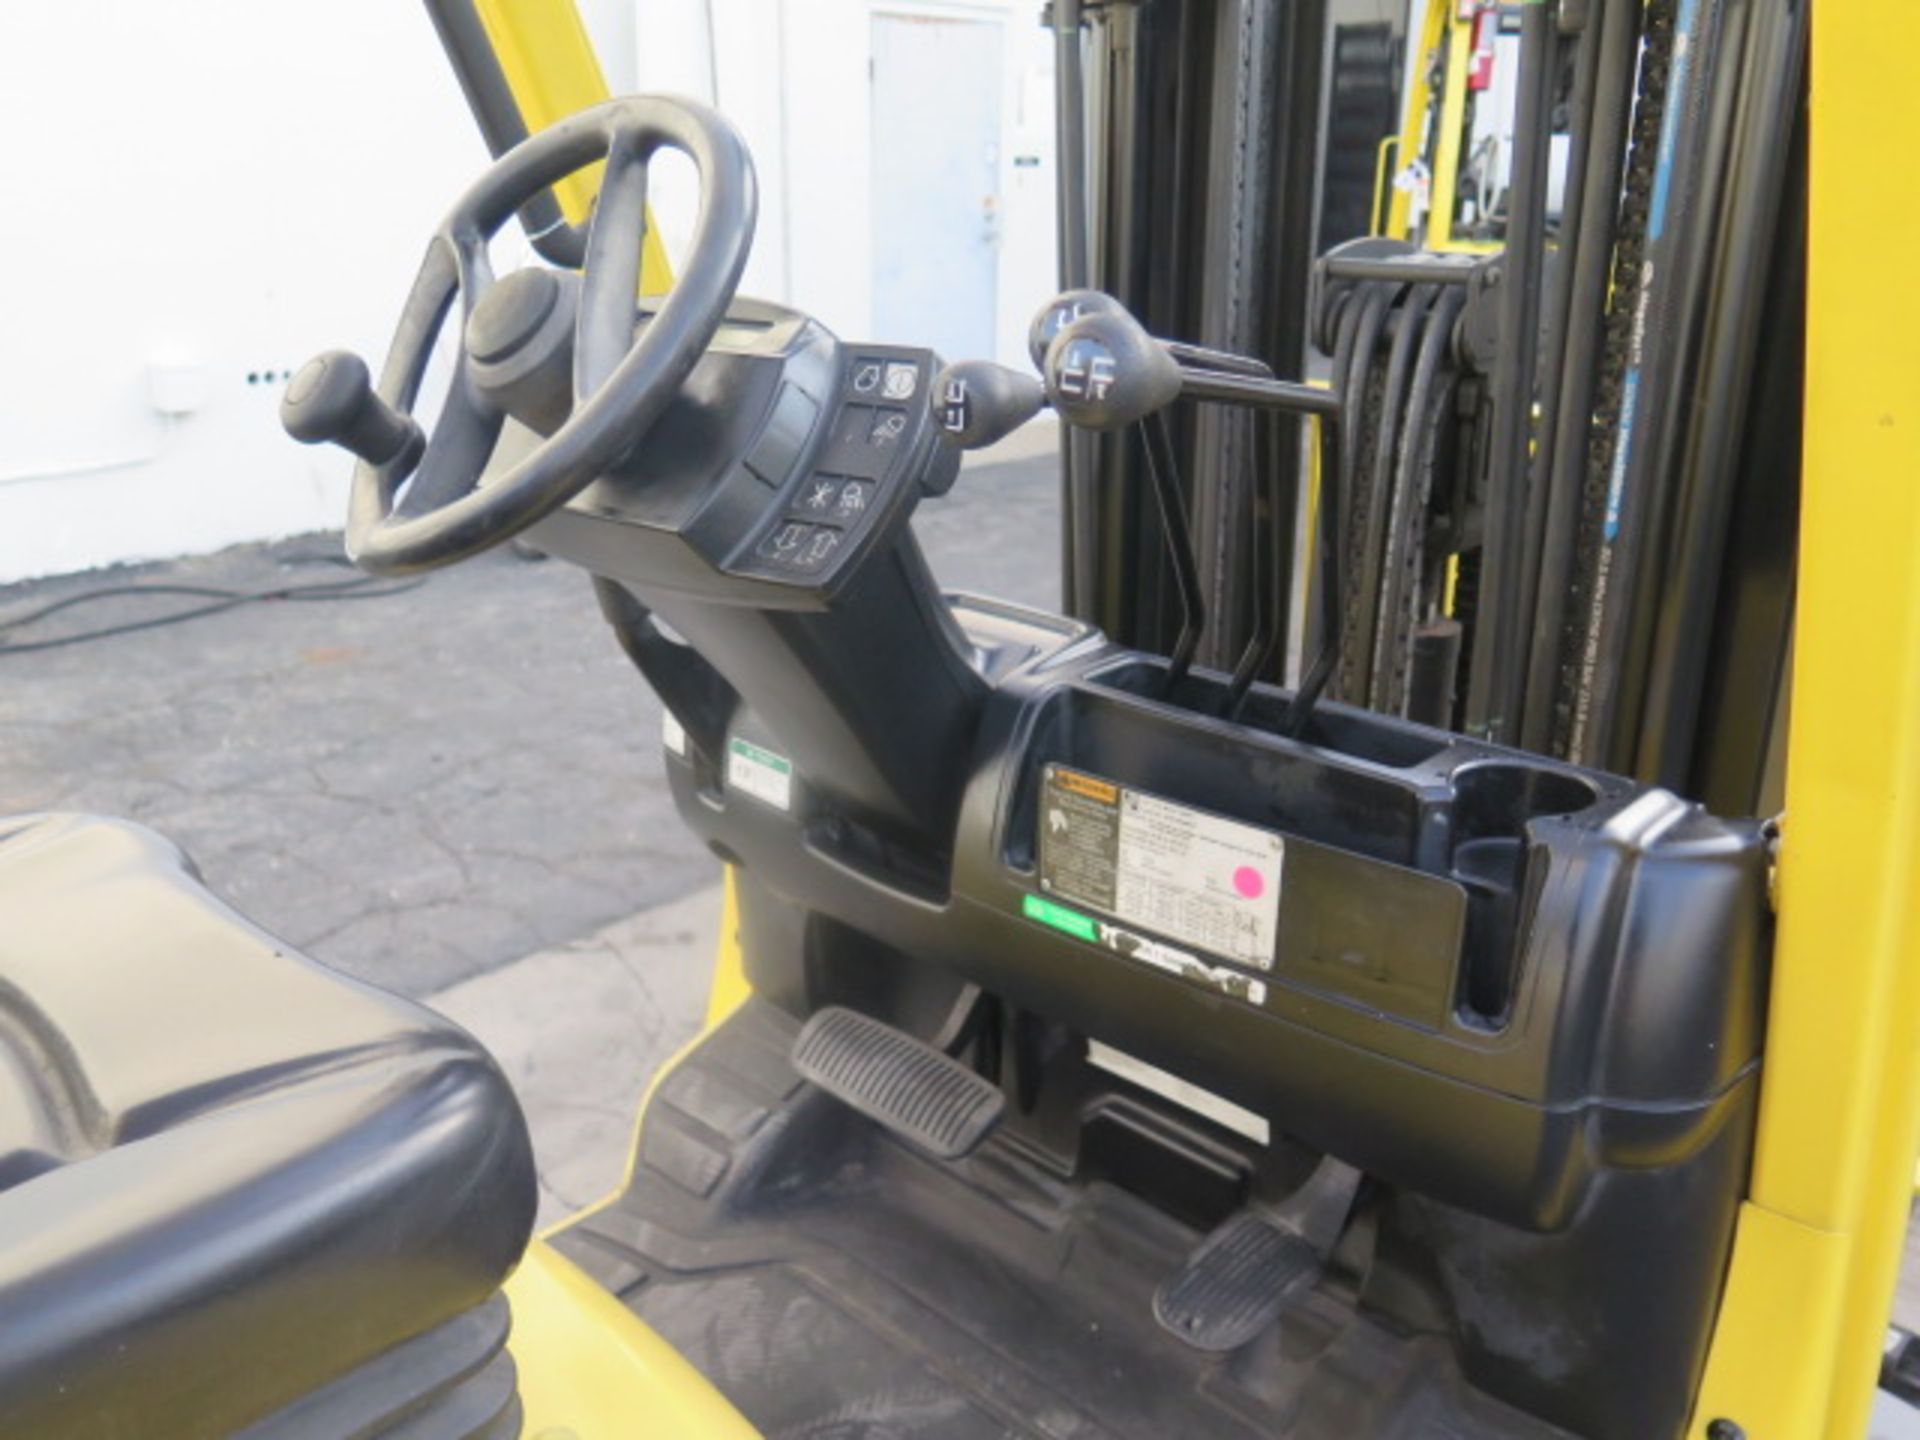 2016 Hyster S50FT 5000 Lb Cap LPG Forklift s/n H187V04981P, 3-Stage Mast, 189” Lift, SOLD AS IS - Image 10 of 19